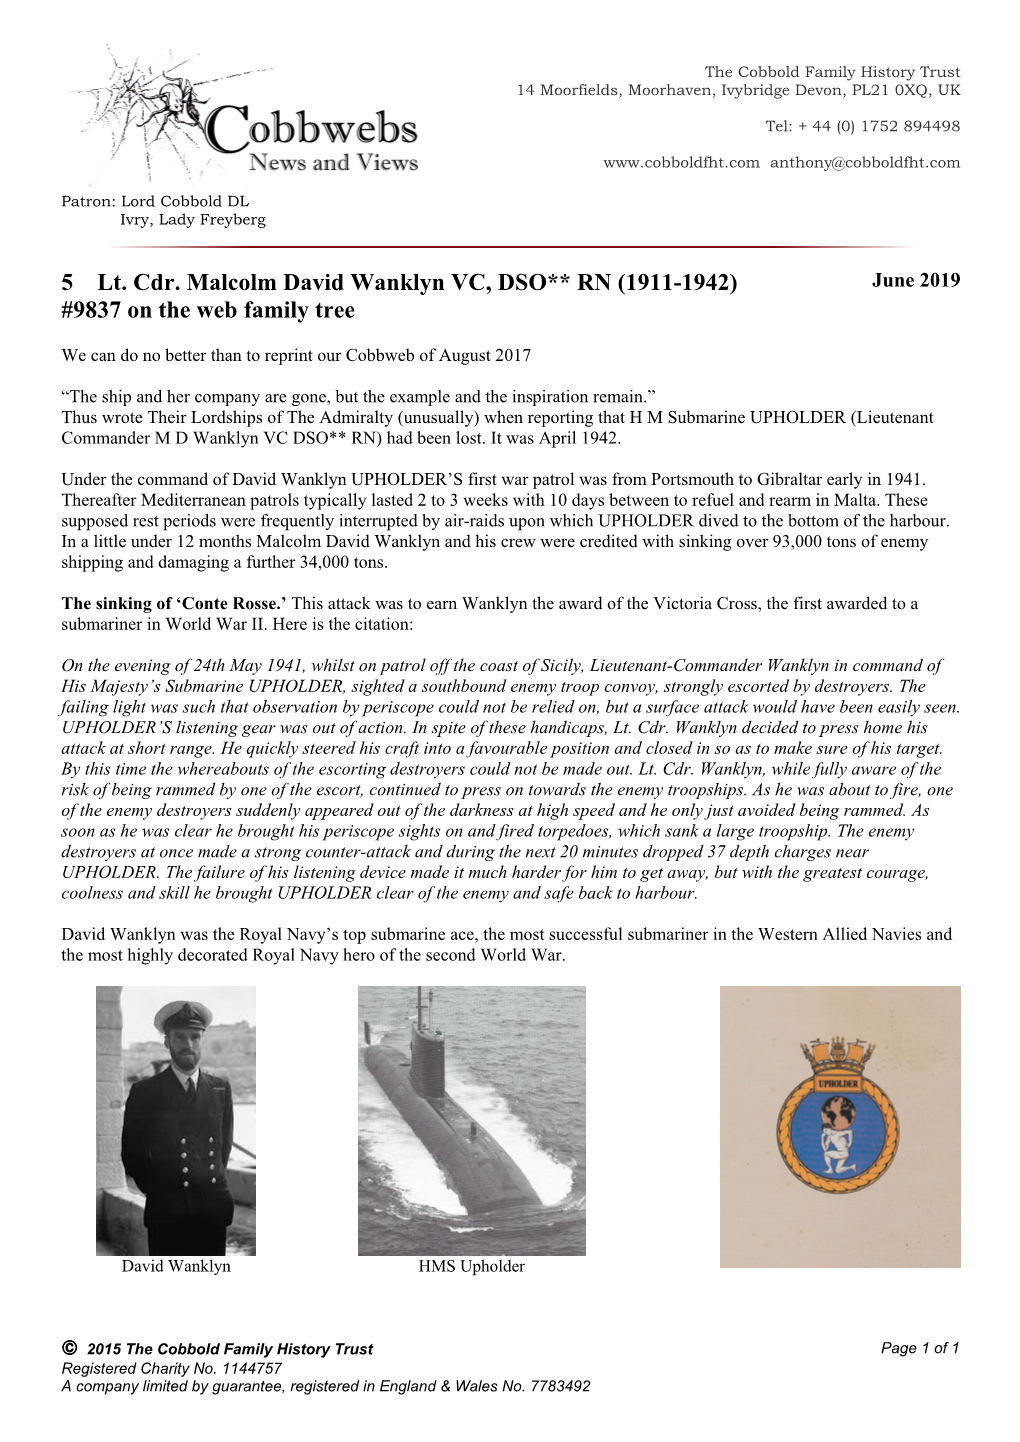 5 Lt. Cdr. Malcolm David Wanklyn VC, DSO** RN (1911-1942) June 2019 #9837 on the Web Family Tree